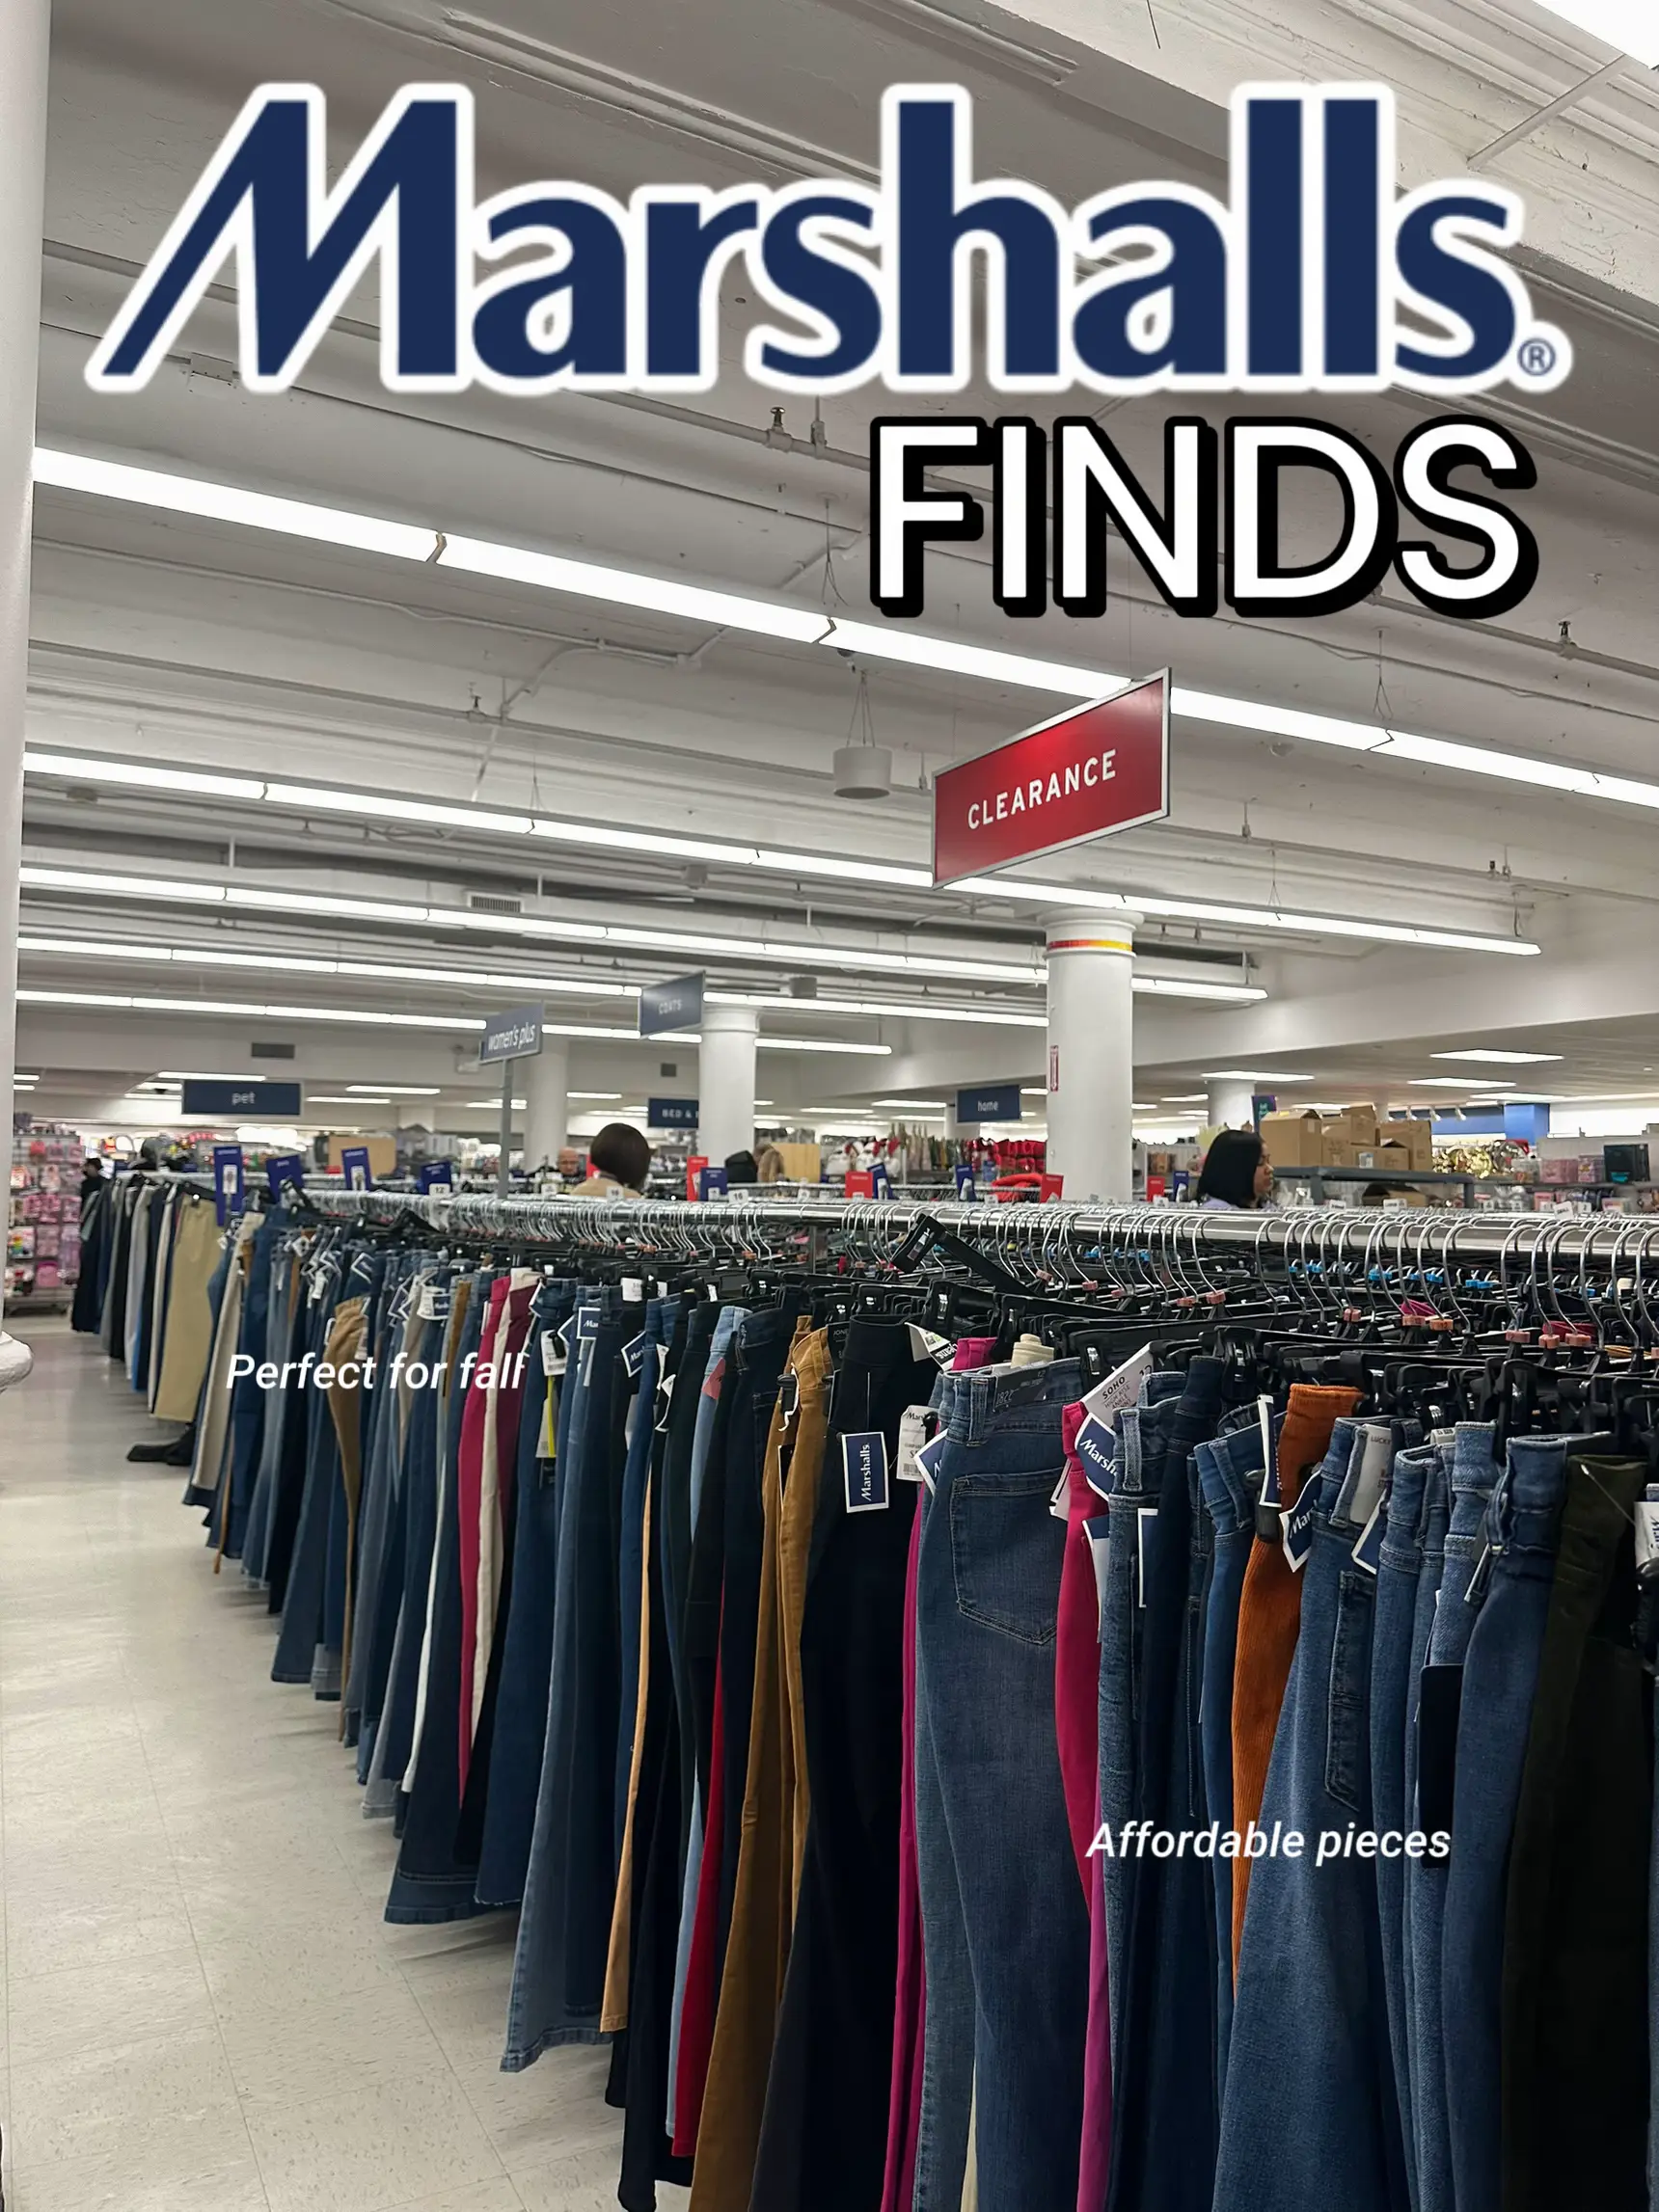 MARSHALLS FINDS, Gallery posted by amanda marie